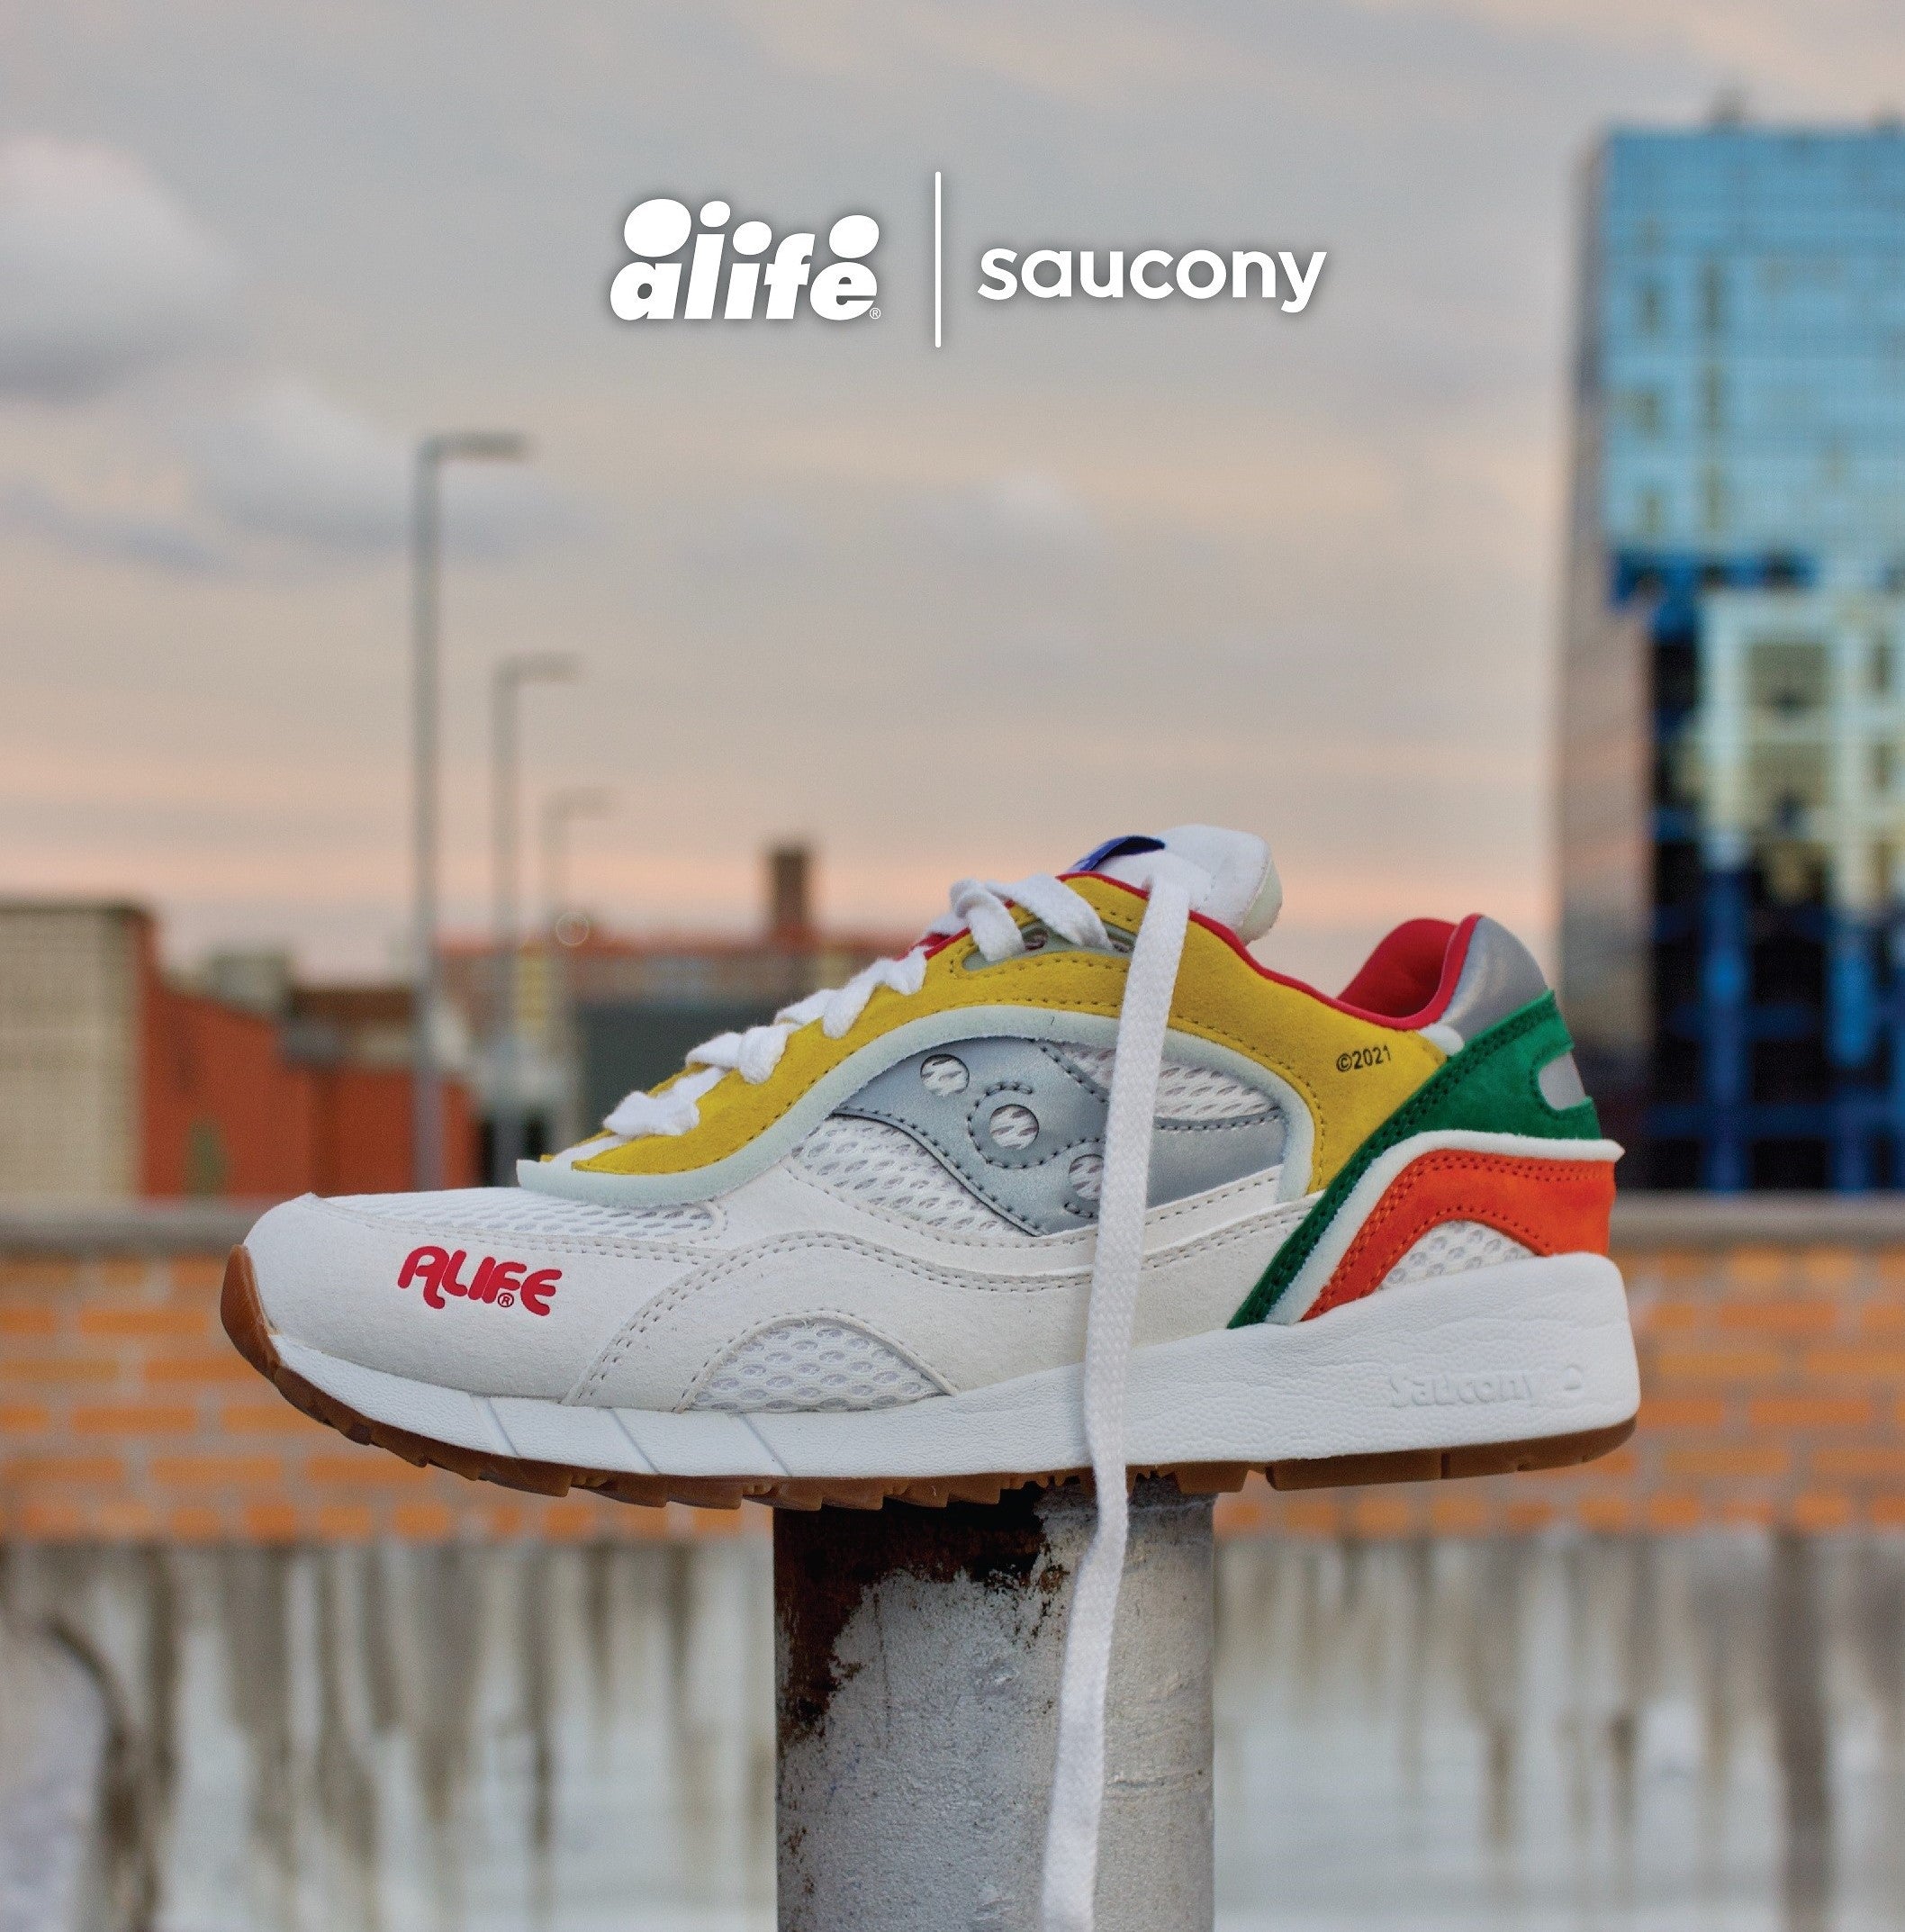 makes - Saucony x a Alife ALIFE classic. Shadow 6000